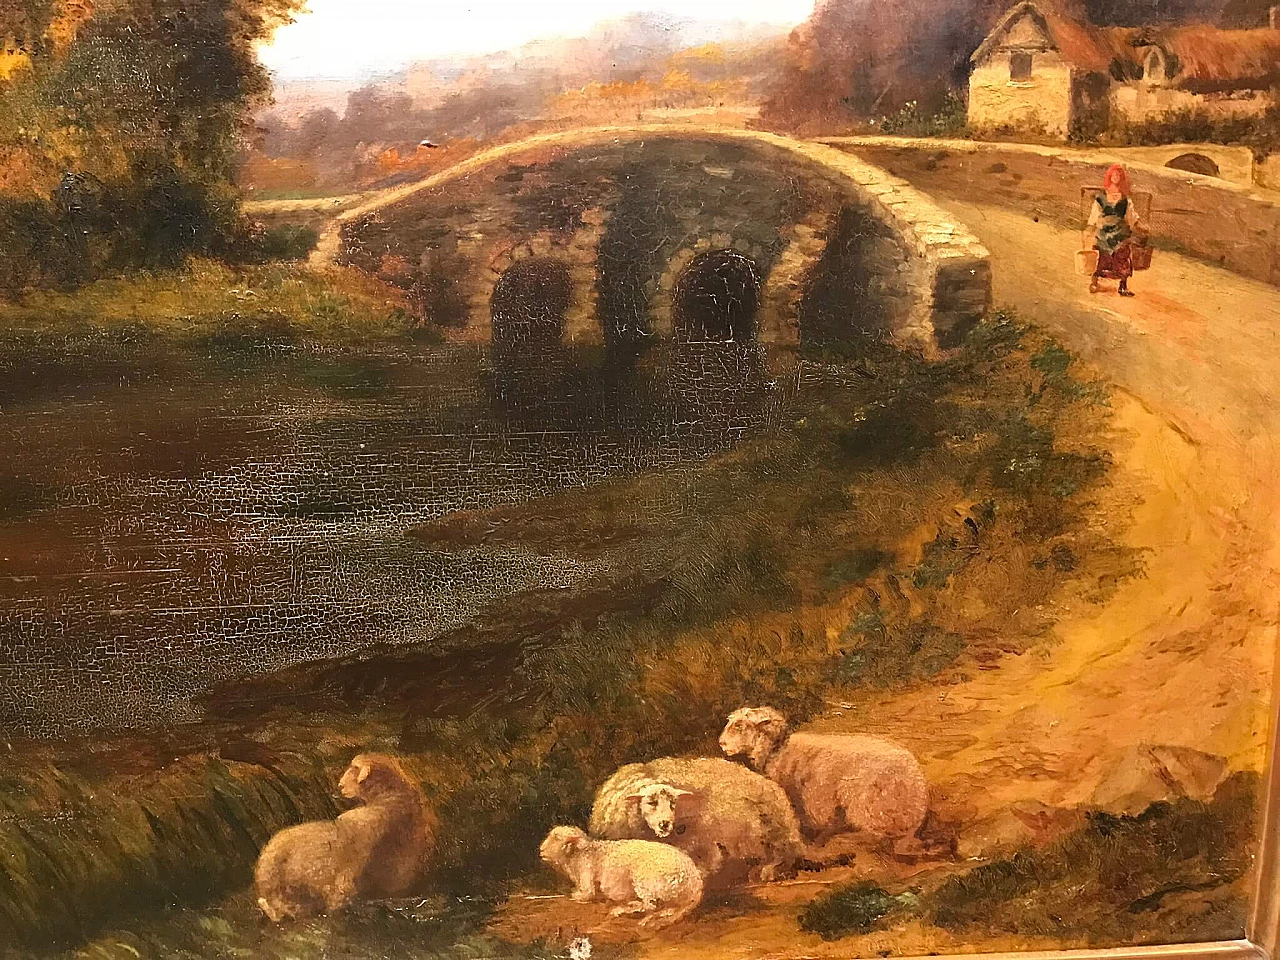 Oil painting on canvas with bucolic landscape, '800 1175904